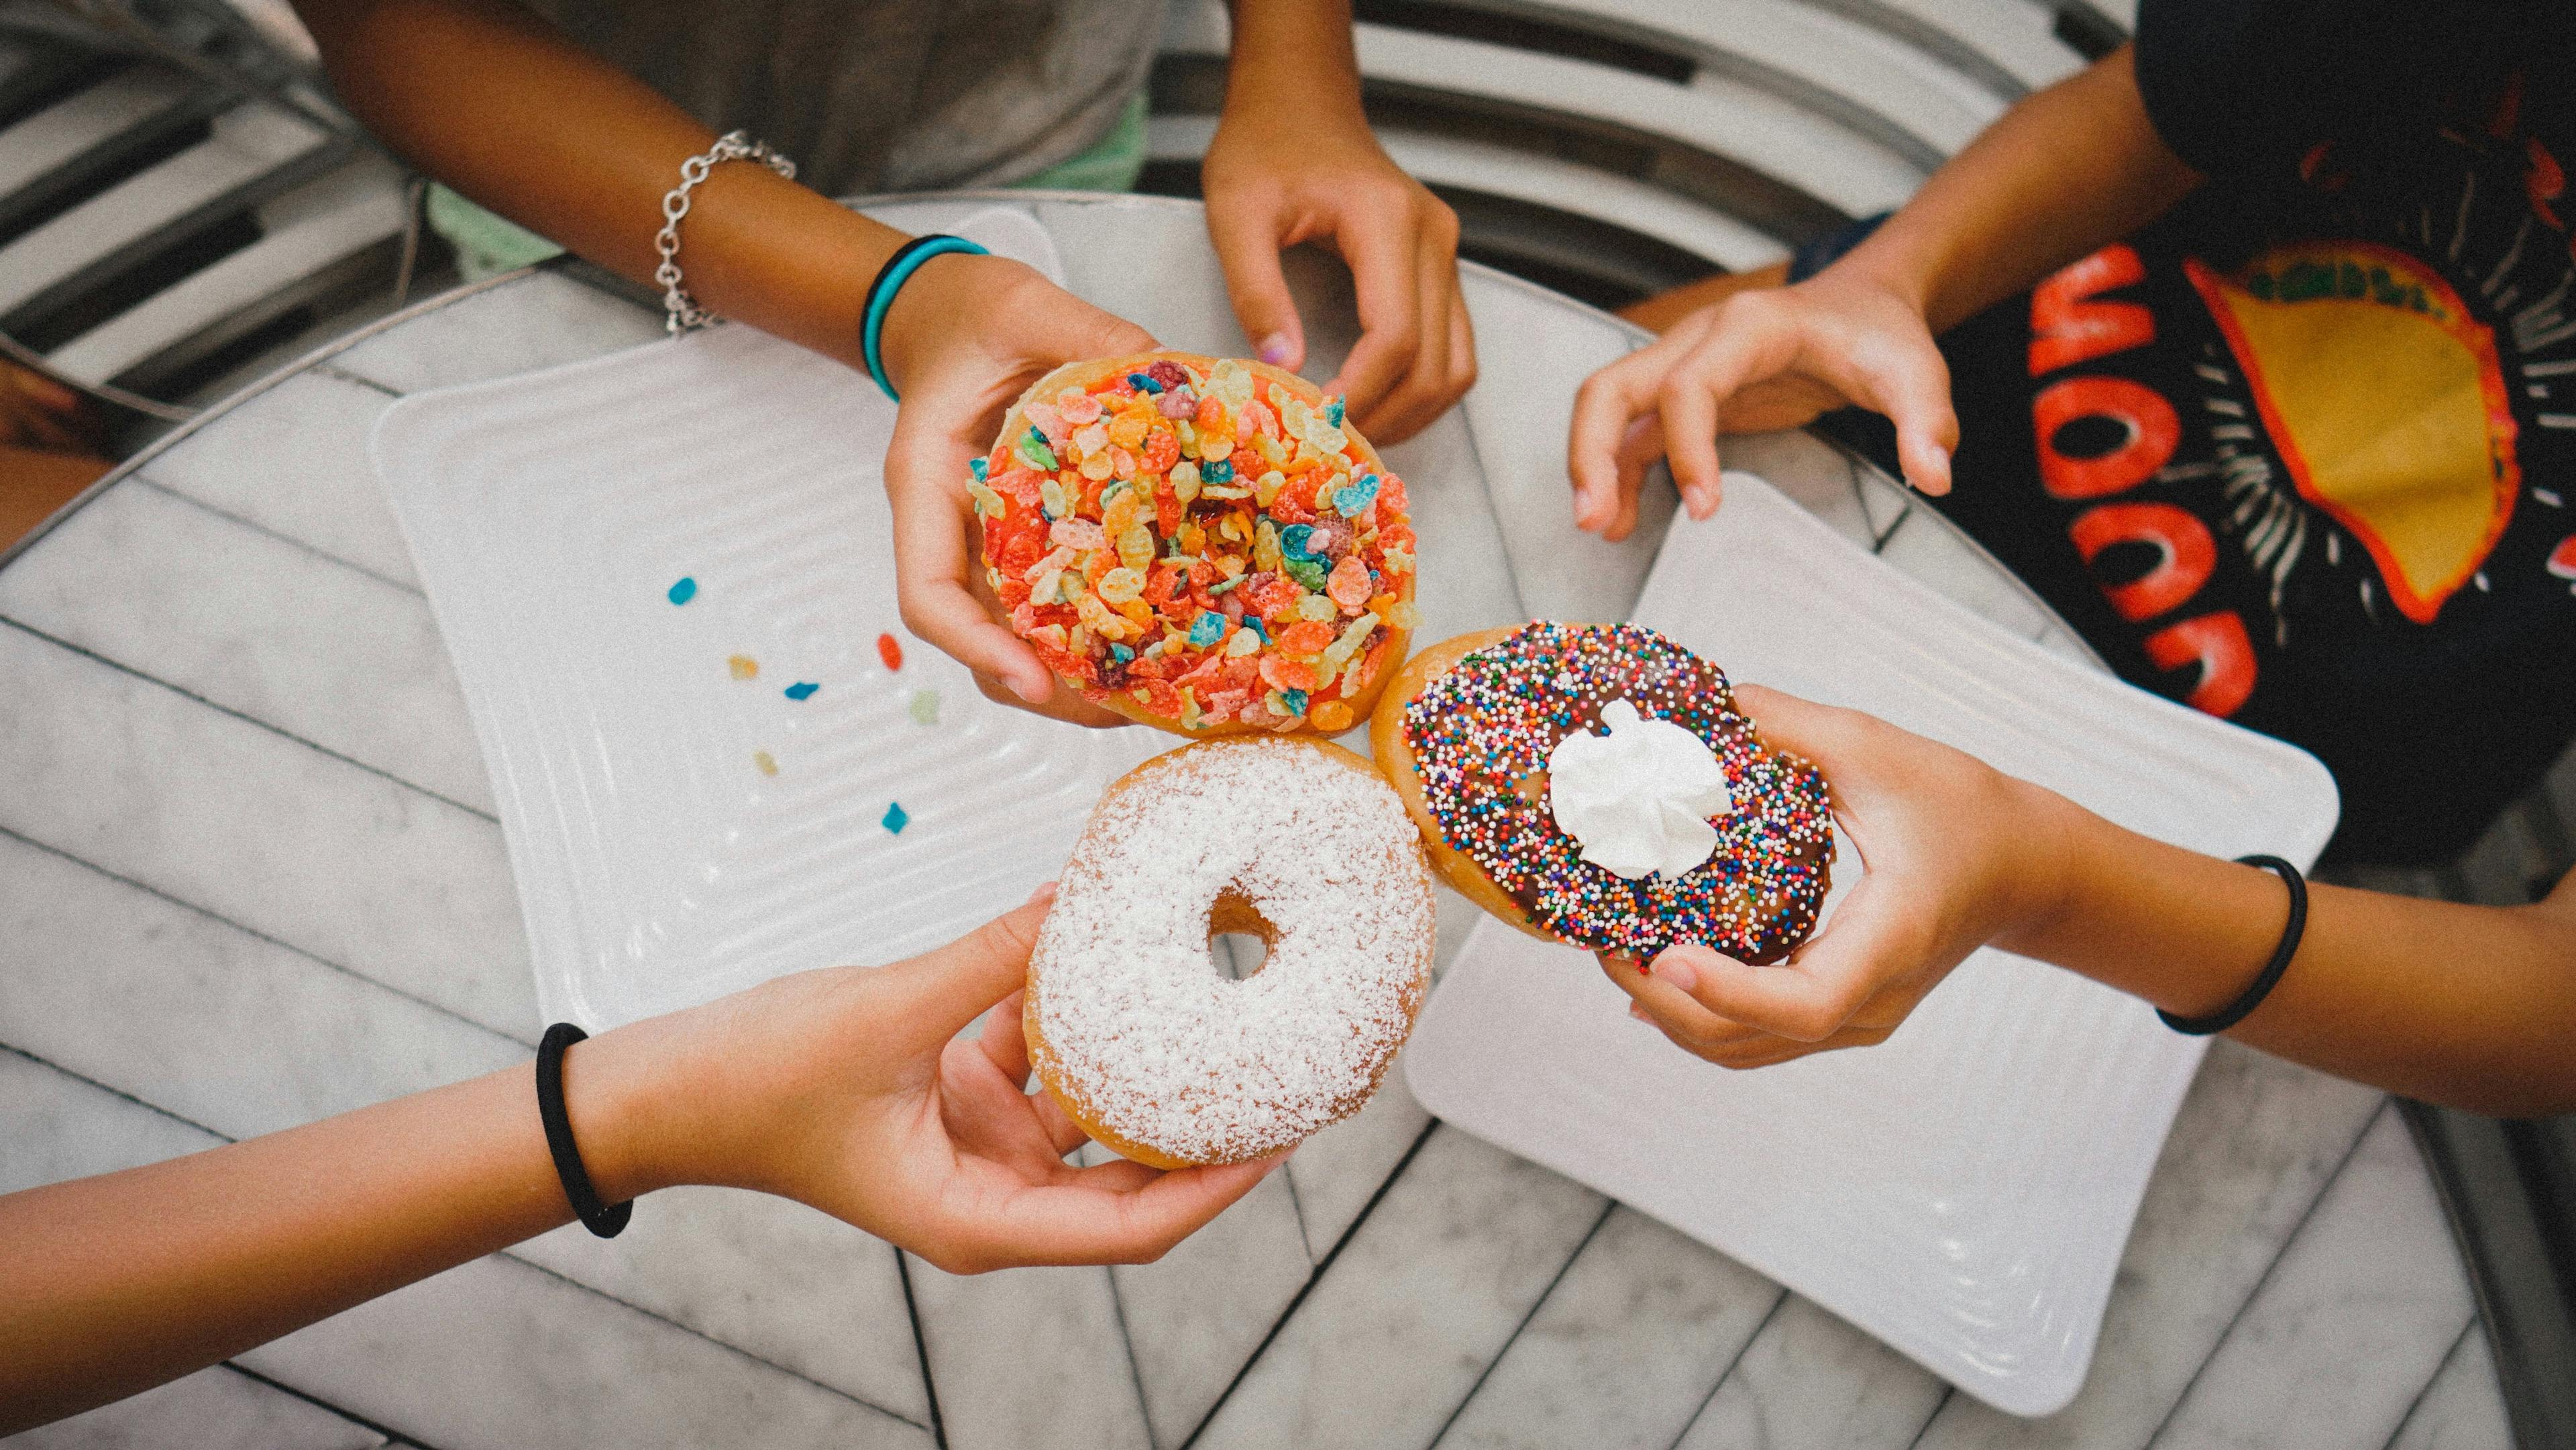 Three people holding donuts